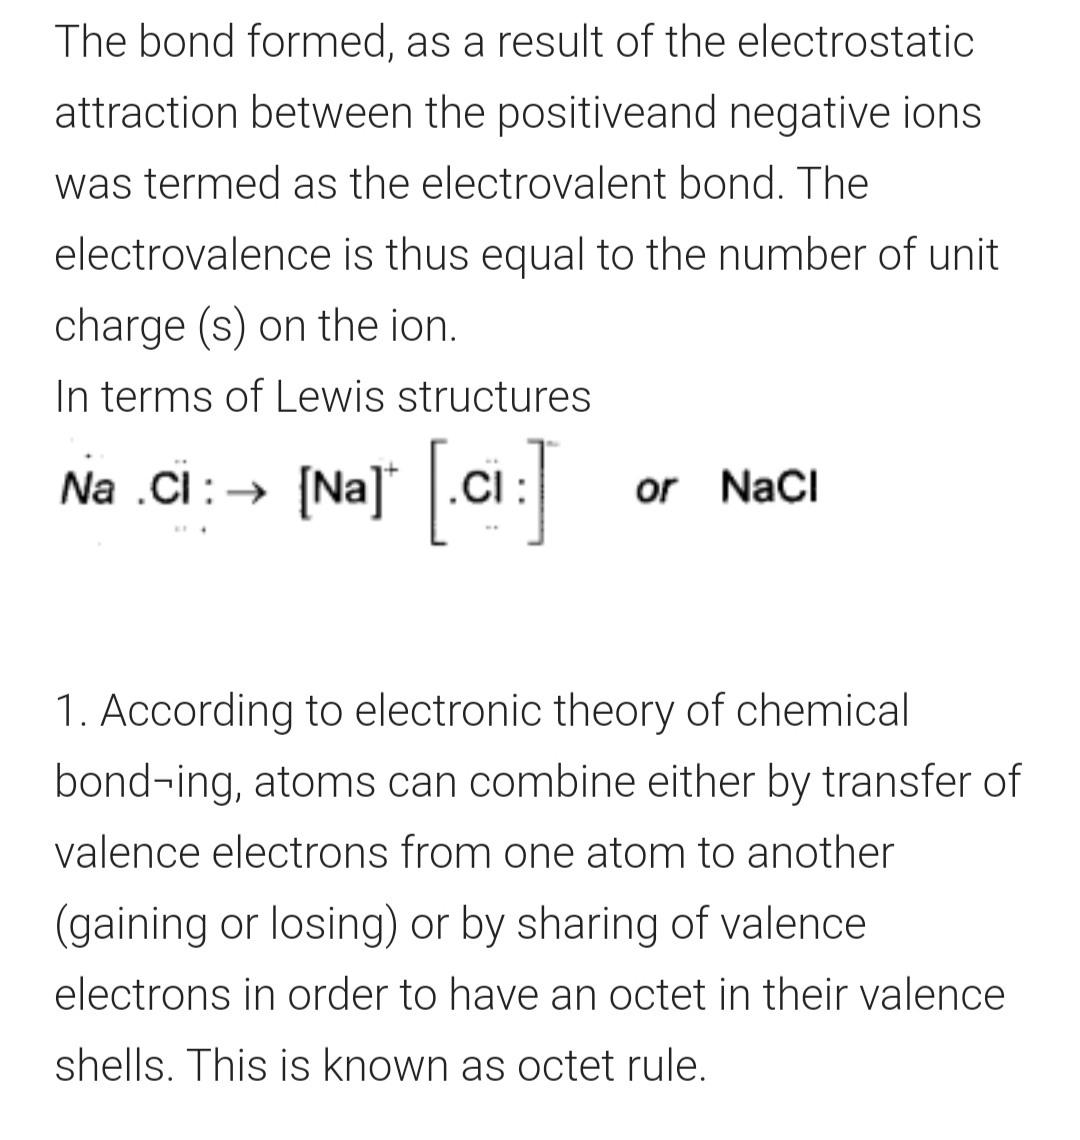 The bond formed, as a result of the electrostatic attraction